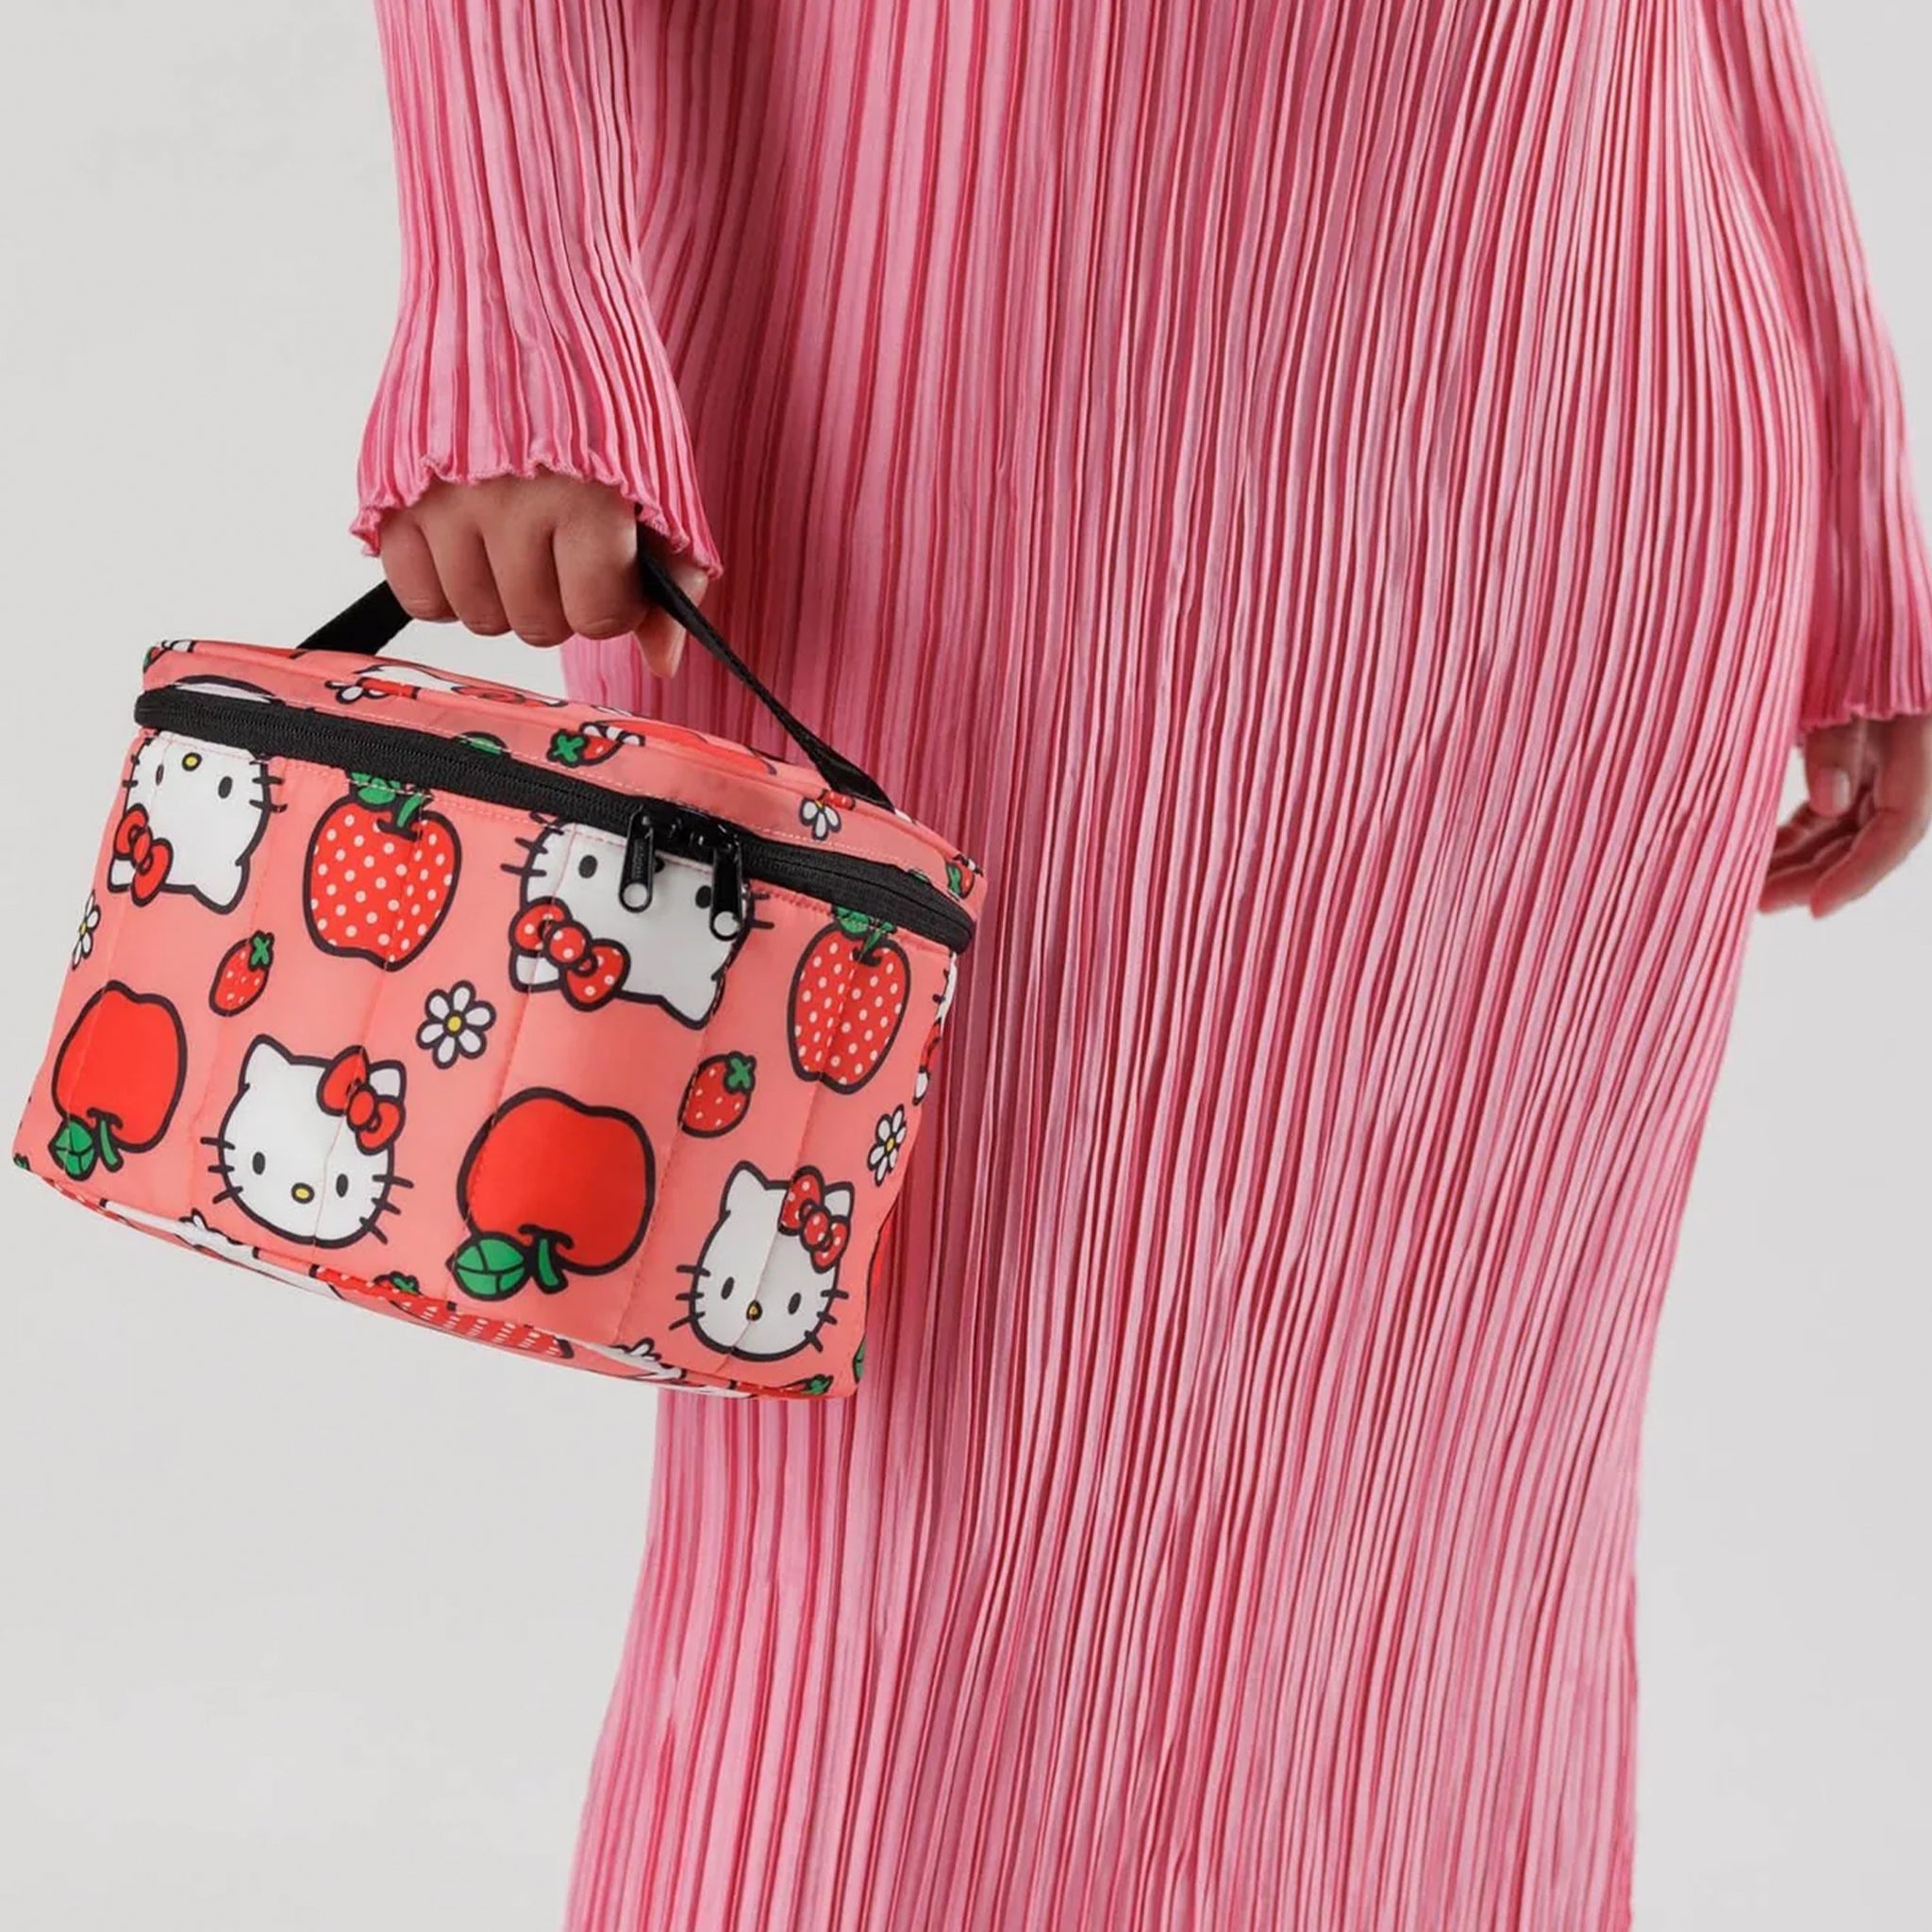 A pink and red Hellot Kitty patterned lunch box with a black handle and zipper.